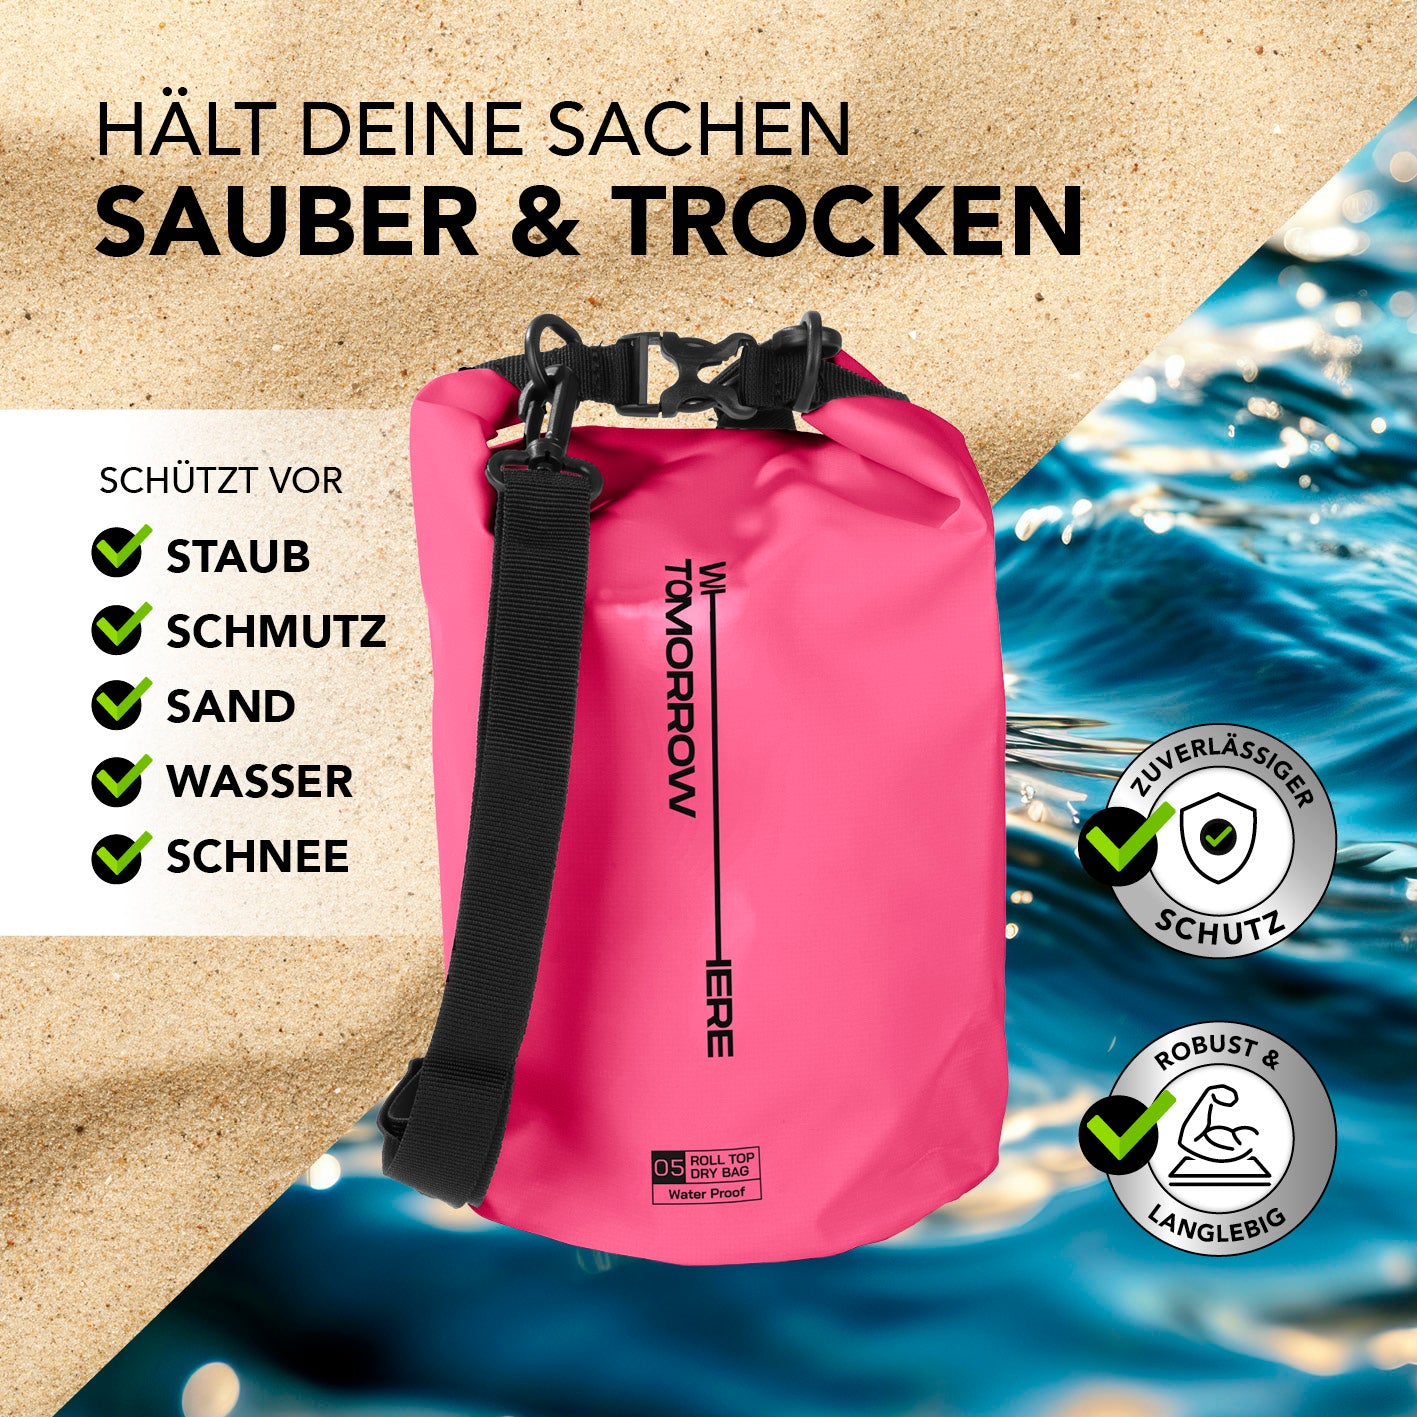 Dry Bag 5L - Style 02 - Pink